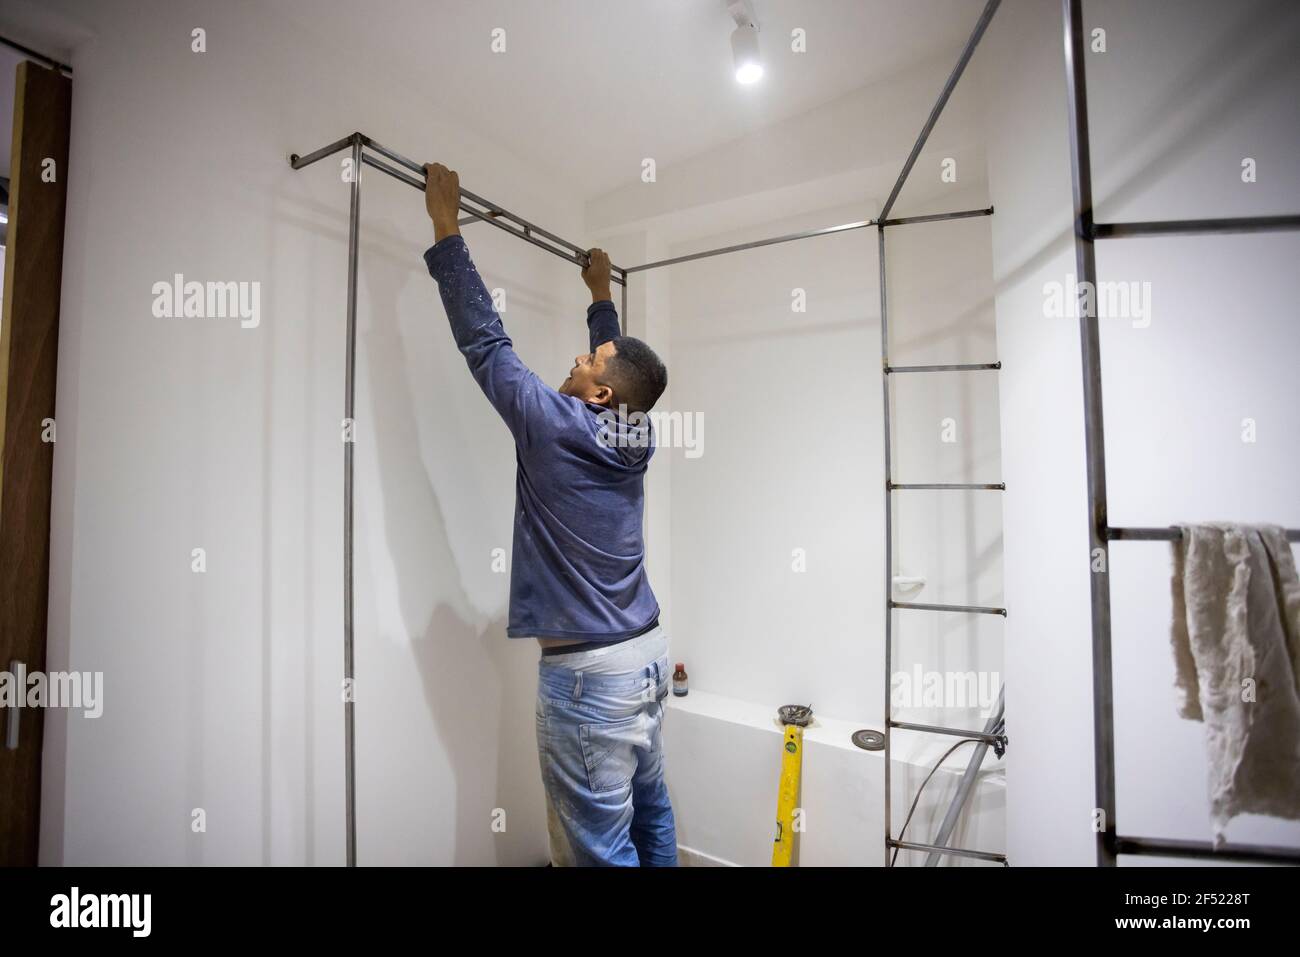 Colombian metalworker preparing the metal structure during work Stock Photo